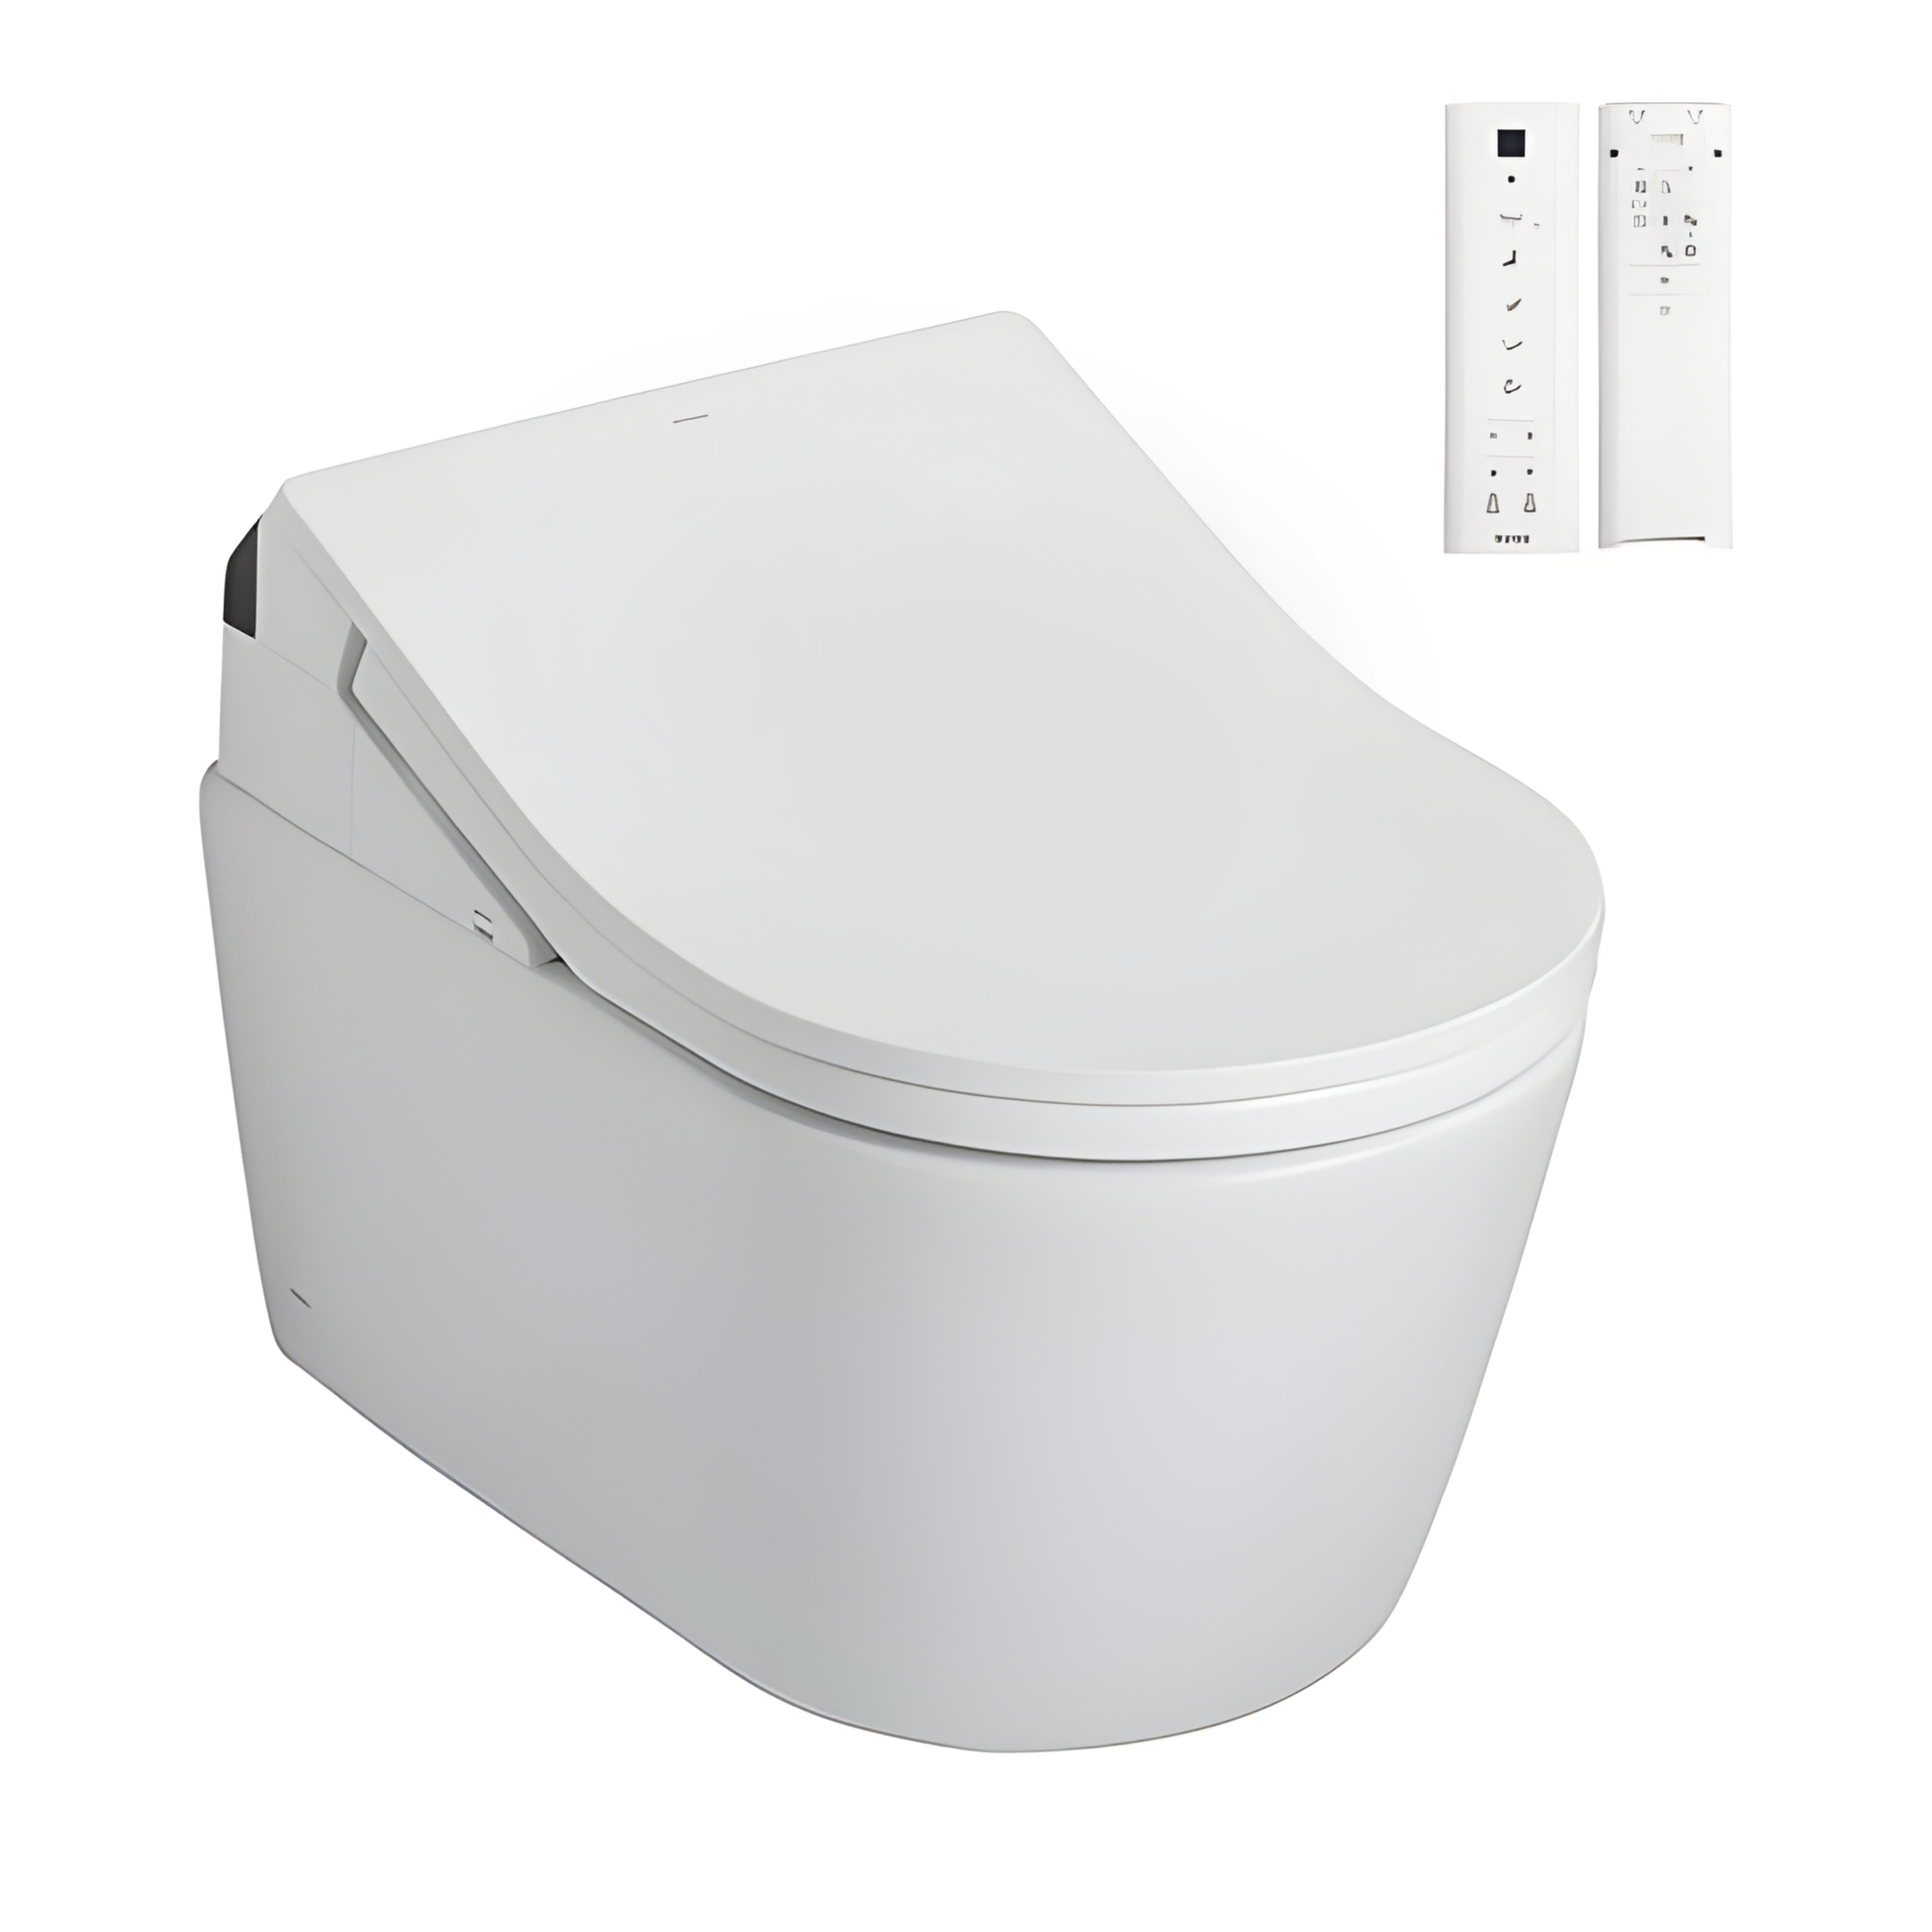 TOTO RX WALL HUNG TOILET WITH WASHLET W/ REMOTE CONTROL PACKAGE (D-SHAPE) GLOSS WHITE